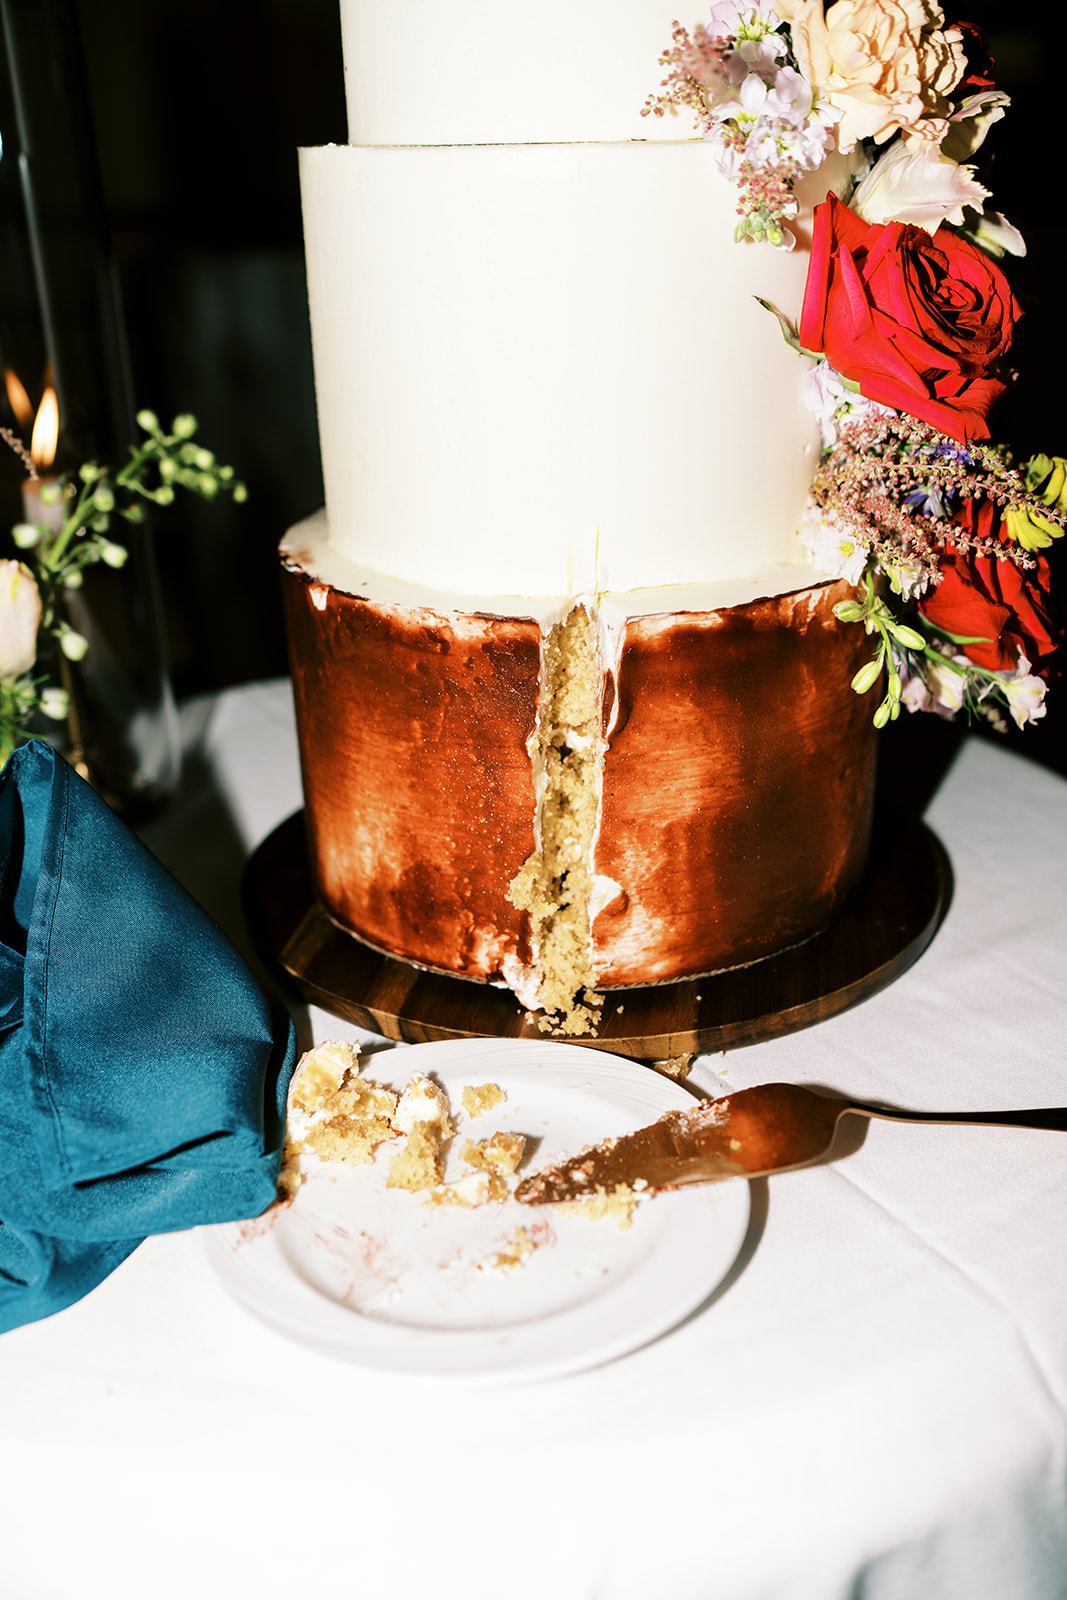 Tiered wedding cake partially sliced with one piece on a cake server captured by Megan Moura Wedding Photographer